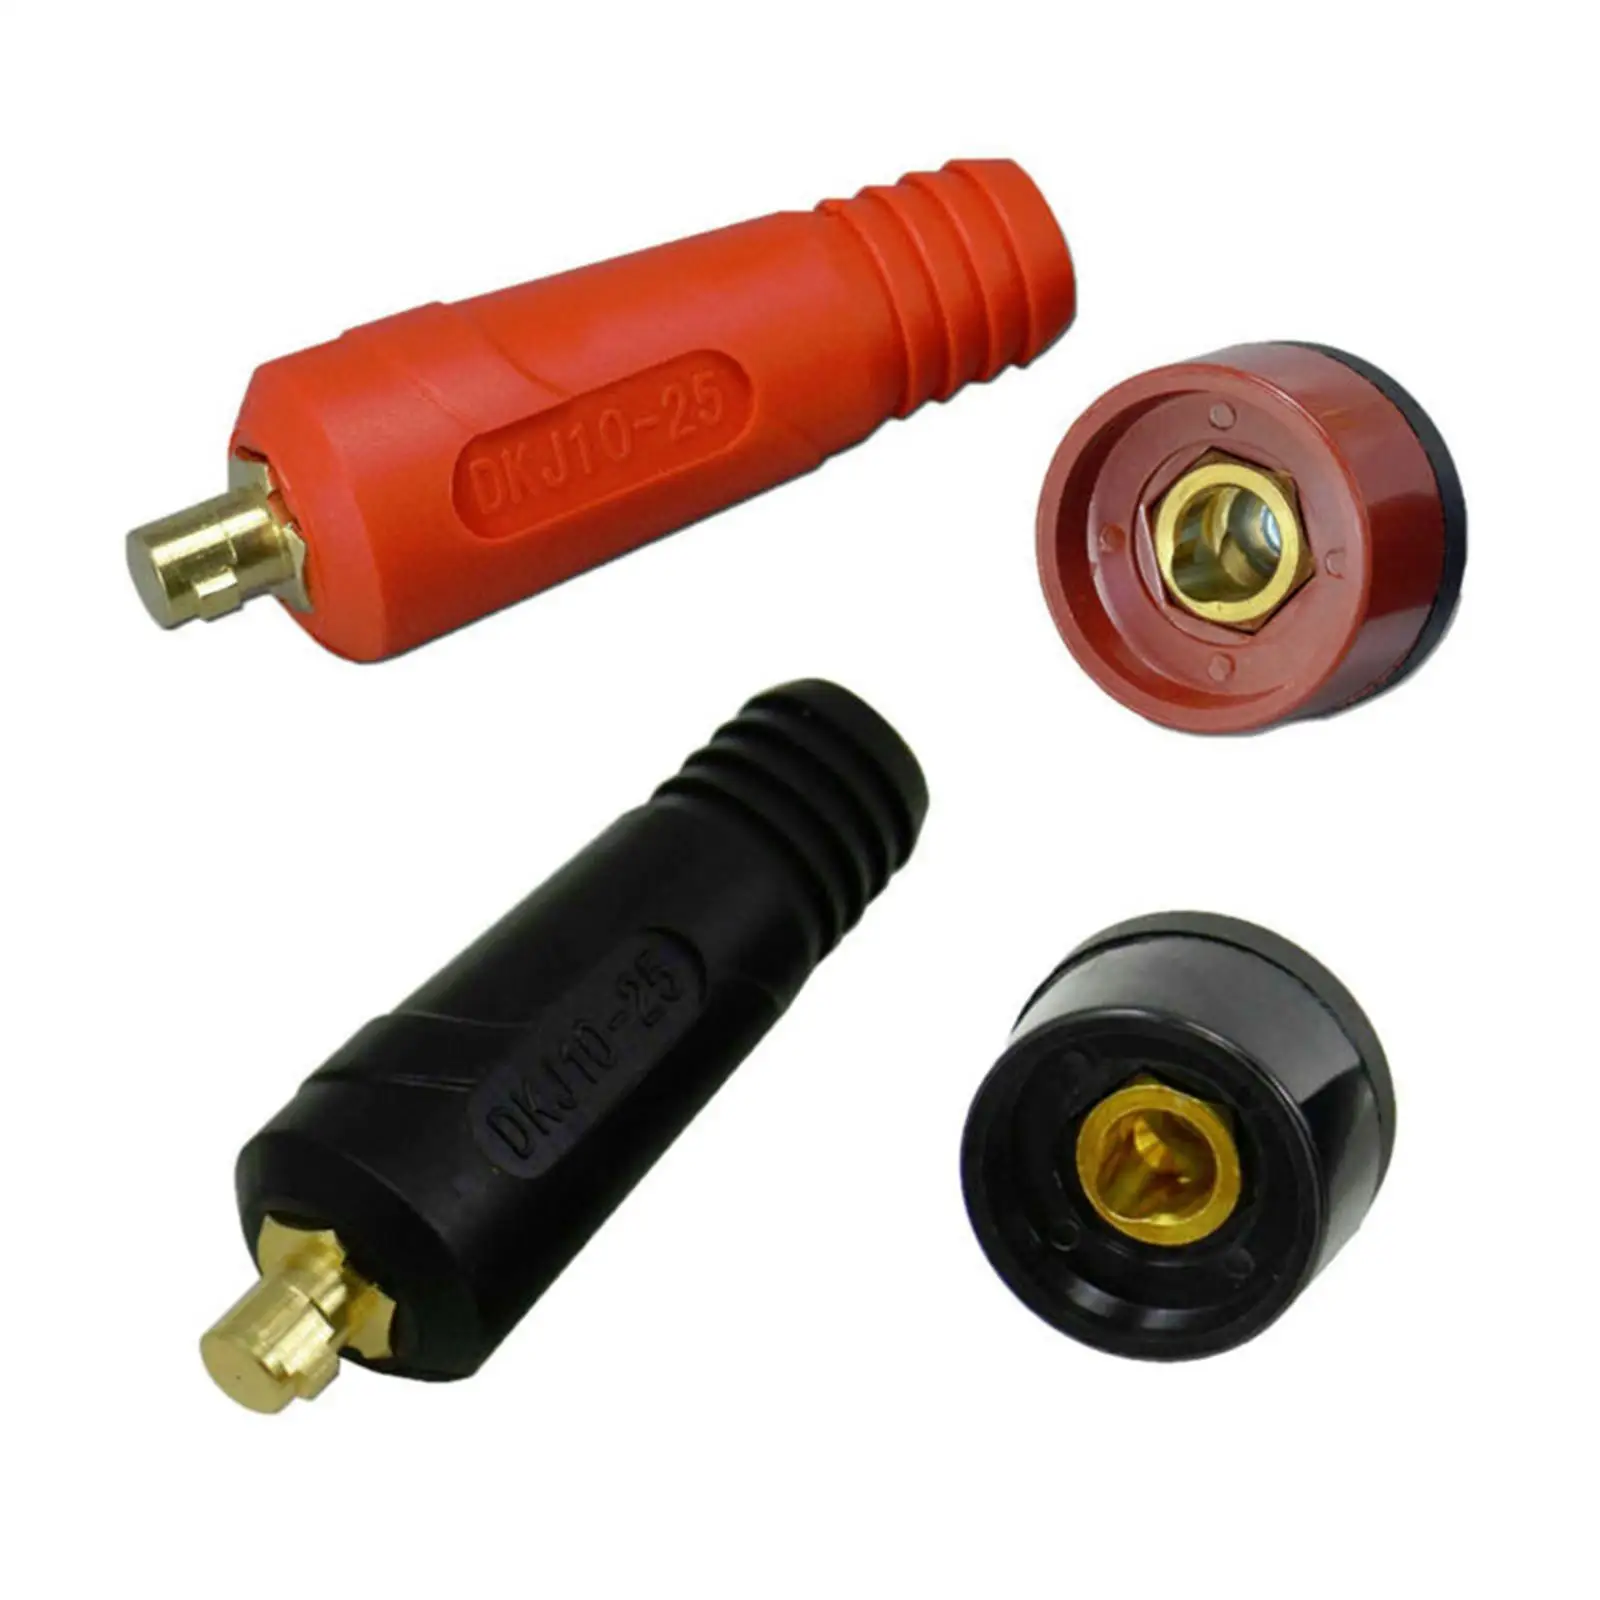 TIG Welding Cable Panel Connector Plug Socket Welding Soldering Tools Quick Connect Connector